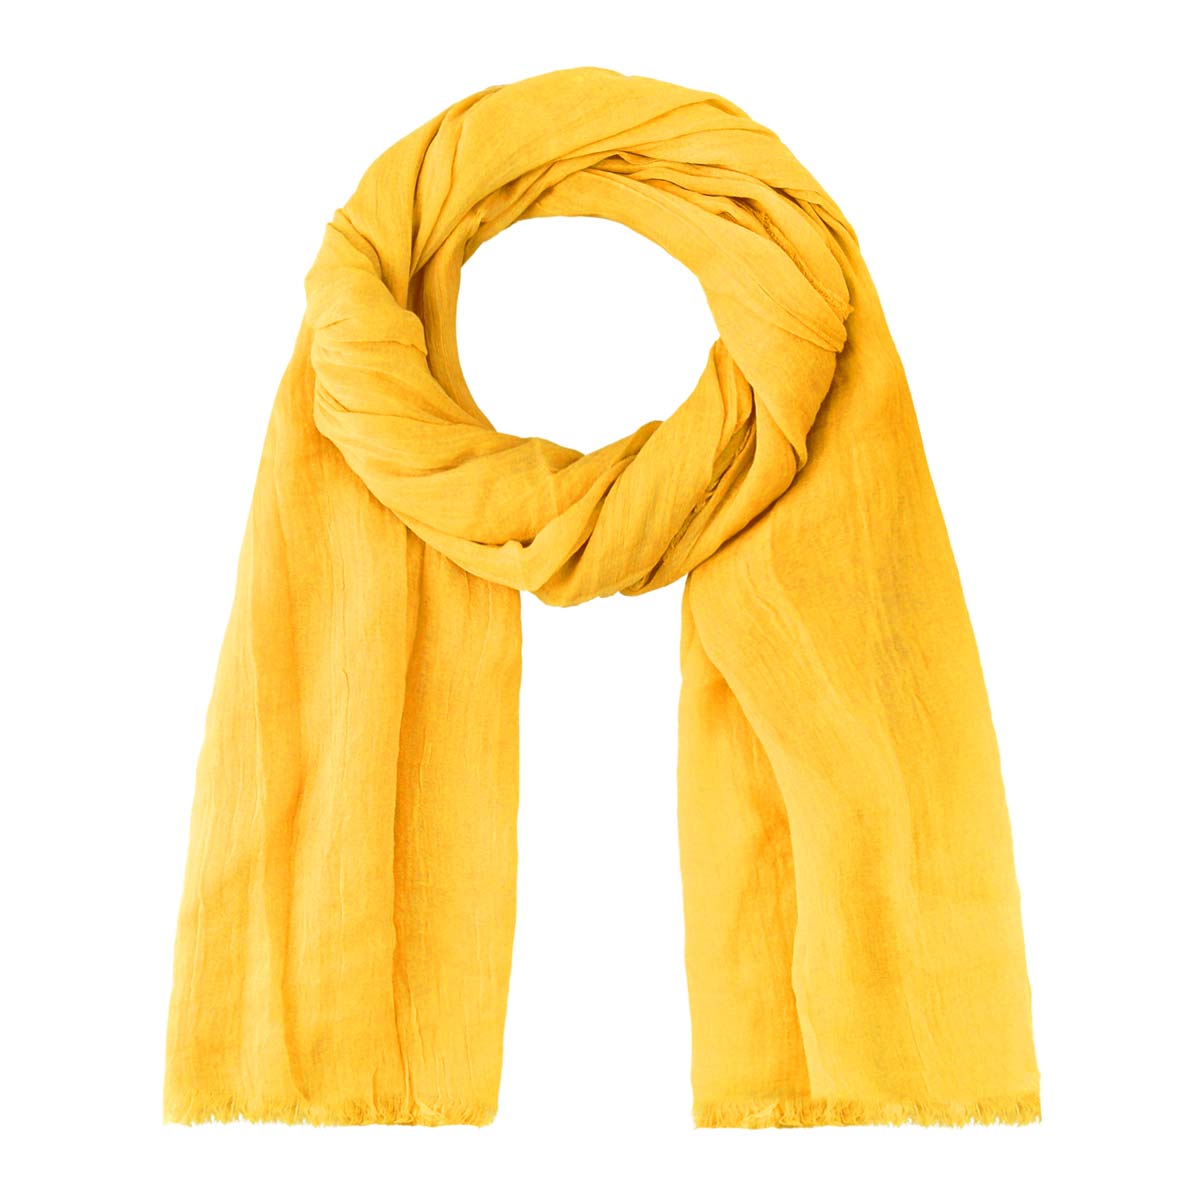 AT-06592_F12-1--_Cheche-viscose-jaune-imperial